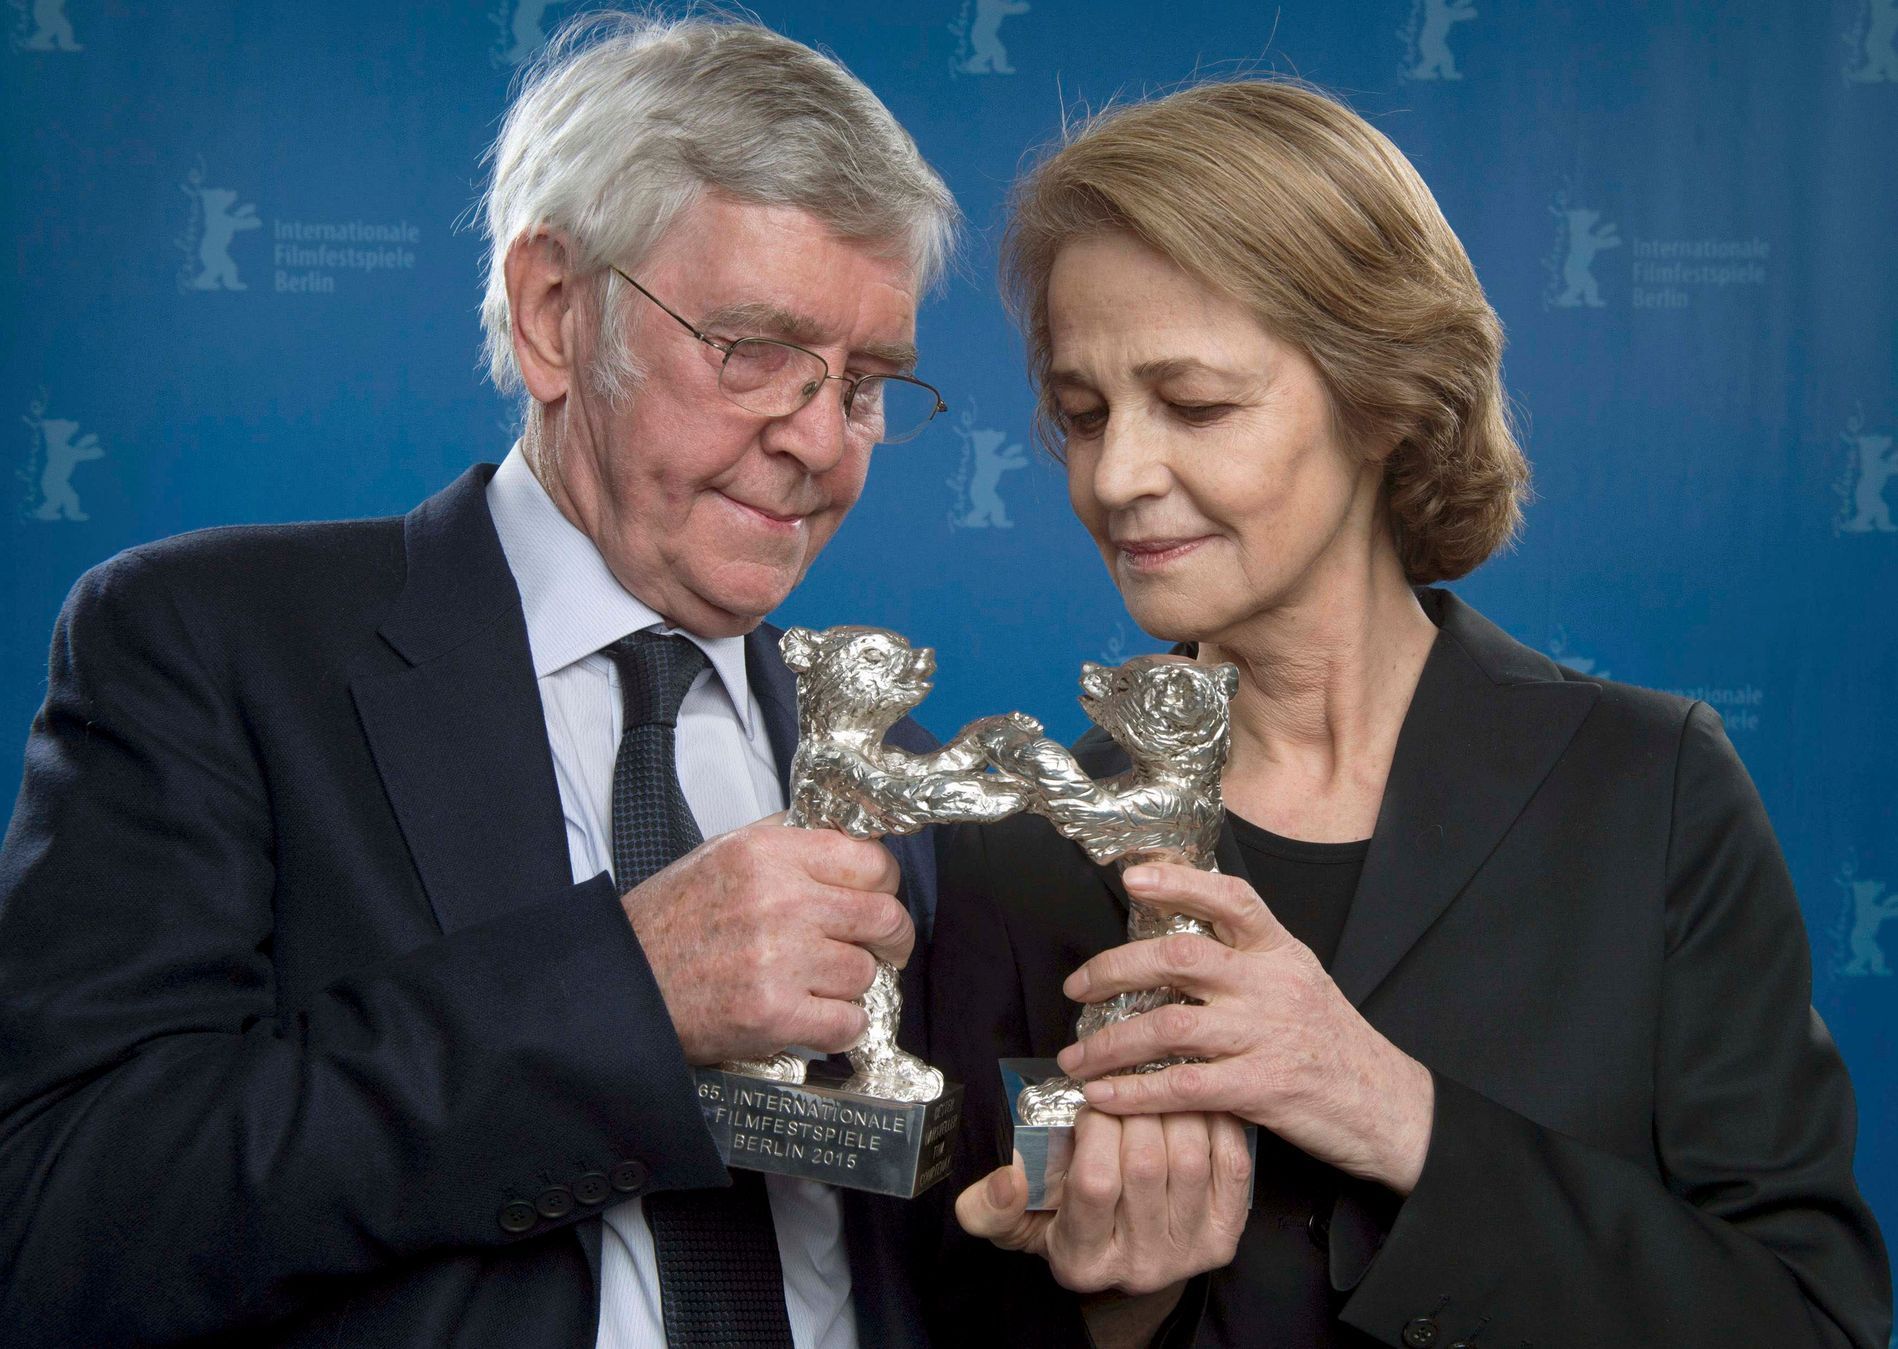 Actors Courtenay and Rampling pose with their Silver Bears for Best Actor and Best Actress after 65th Berlinale International Film Festival in Berlin